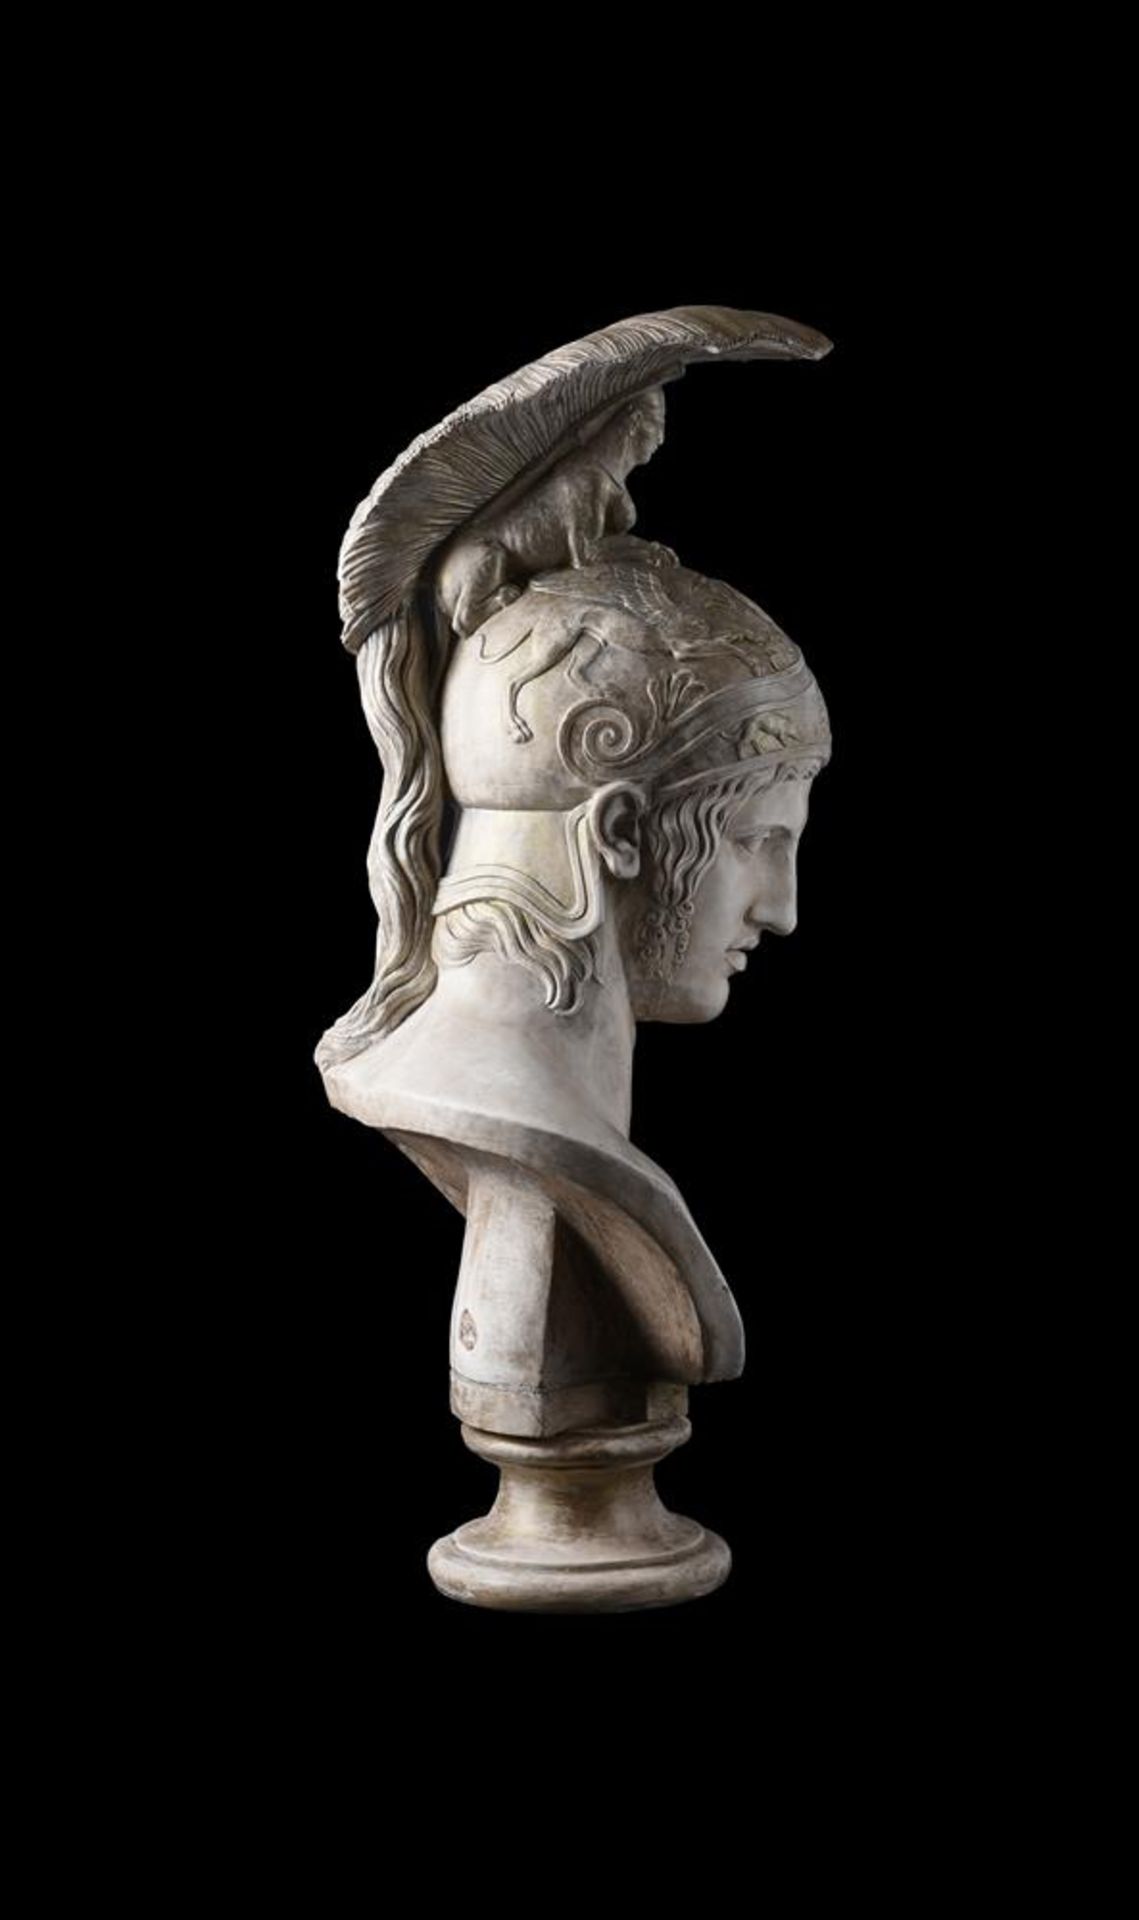 A LARGE PLASTER BUST OF ARES, THE GOD OF WAR, 20TH CENTURY, IN THE MANNER OF BRUCCIANI - Image 3 of 5